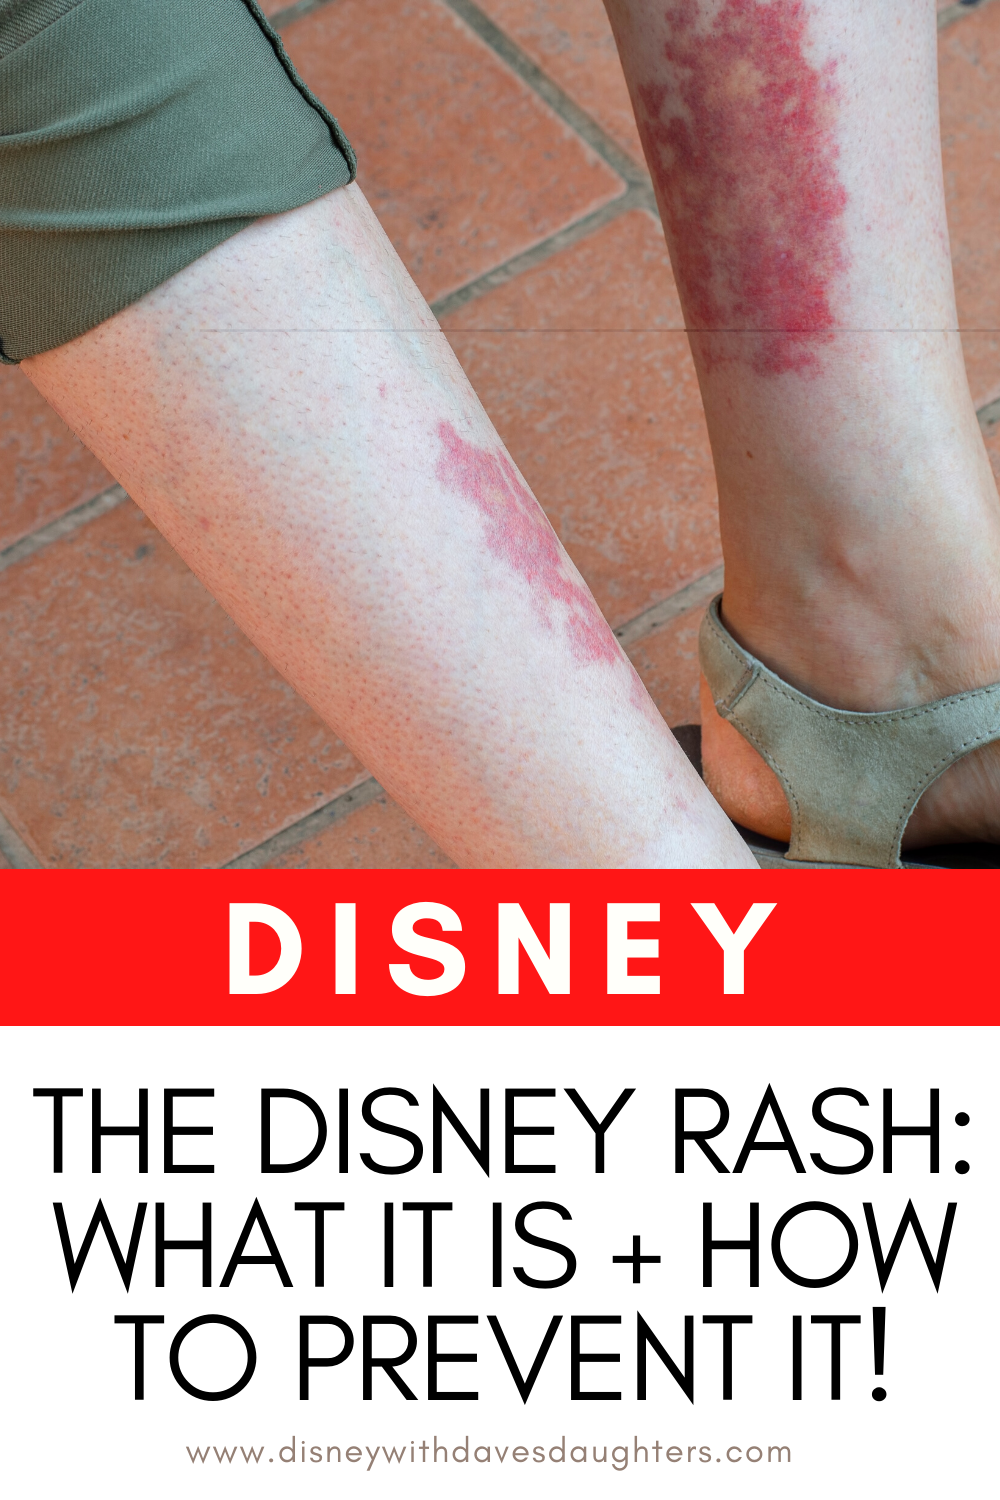 Disney Rash - What It Is, How to Prevent It and How to Treat It - Disney With Dave's Daughters